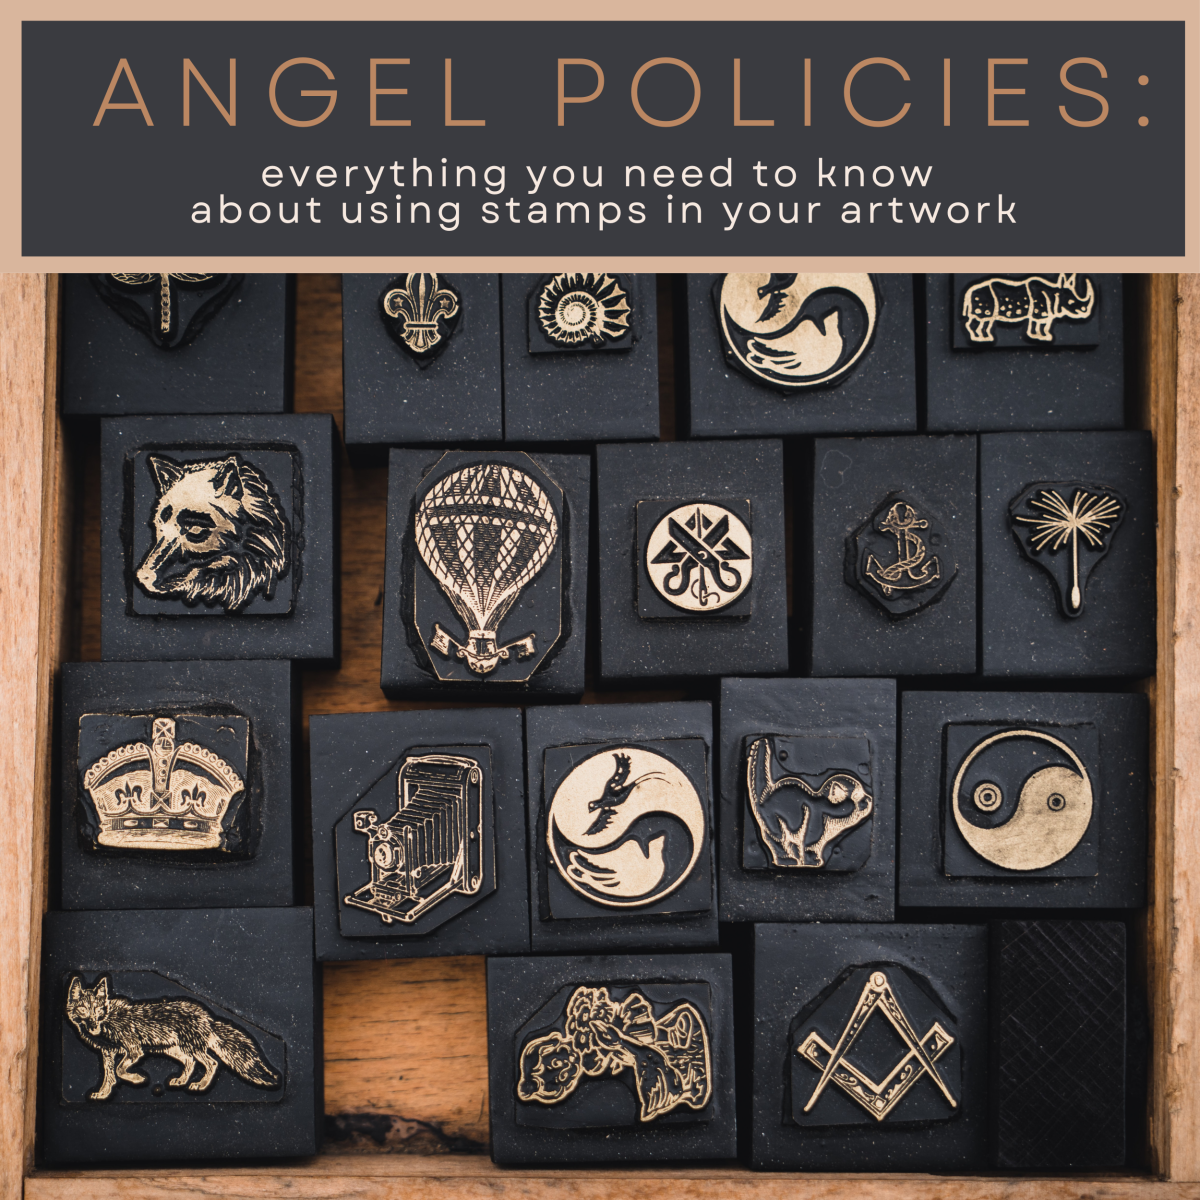 What Are Angel Policies and How Do They Affect Artists and Crafters?